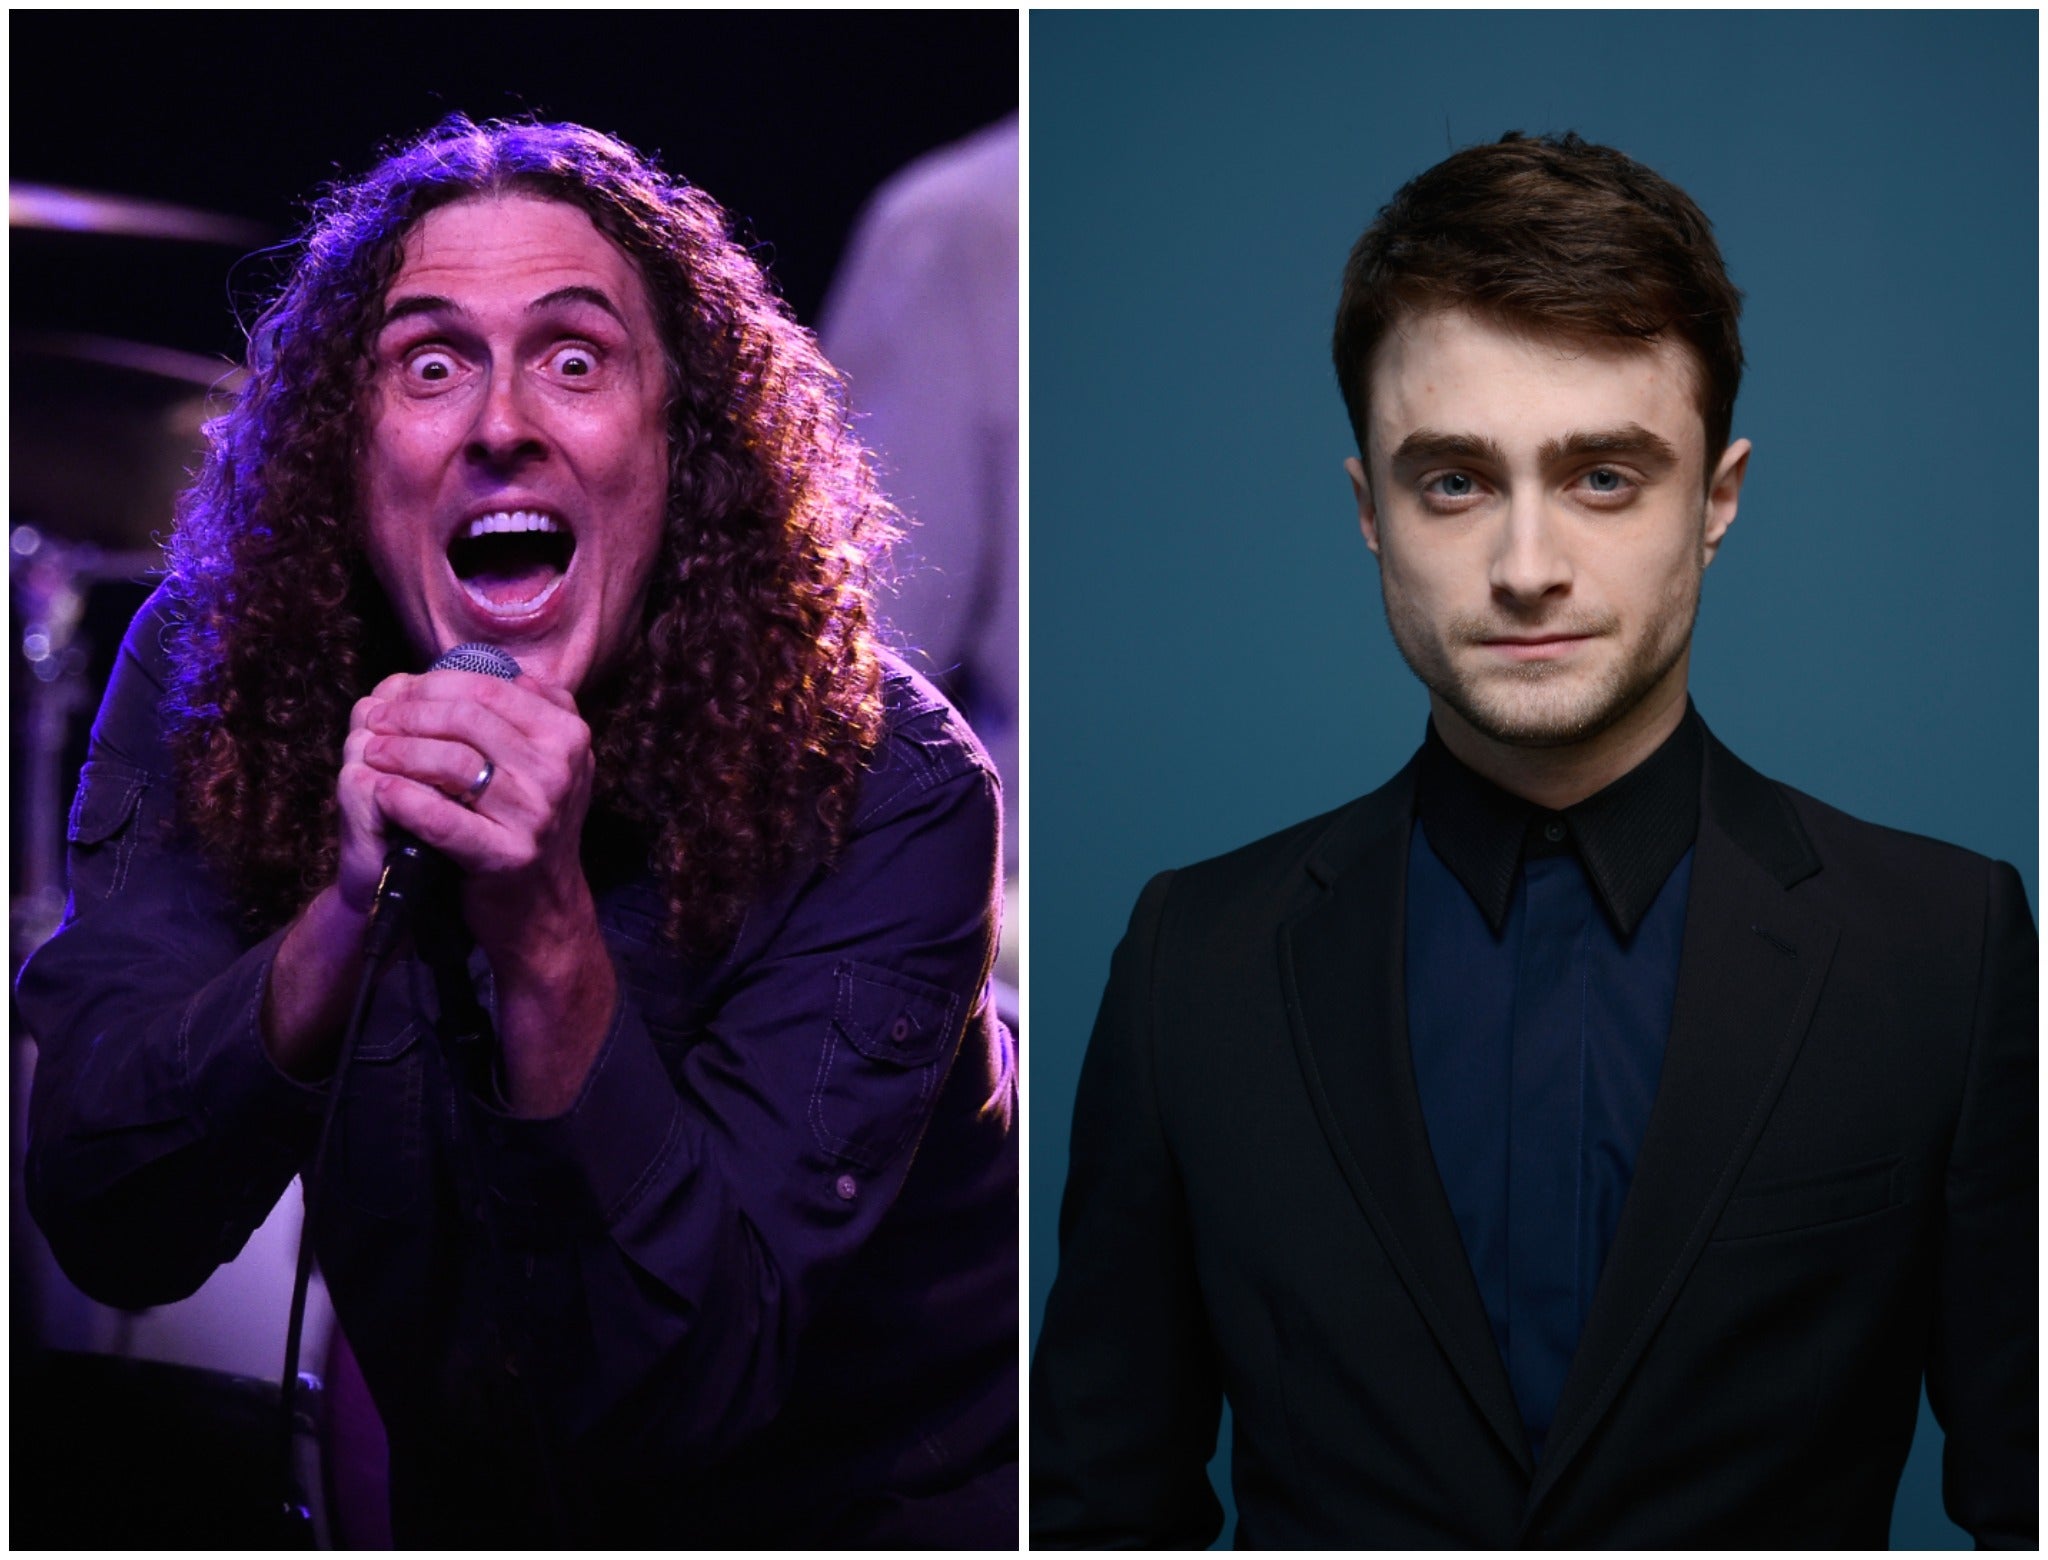 ‘Weird Al’ Yankovic (left) will be portrayed by Daniel Radcliffe in a new movie